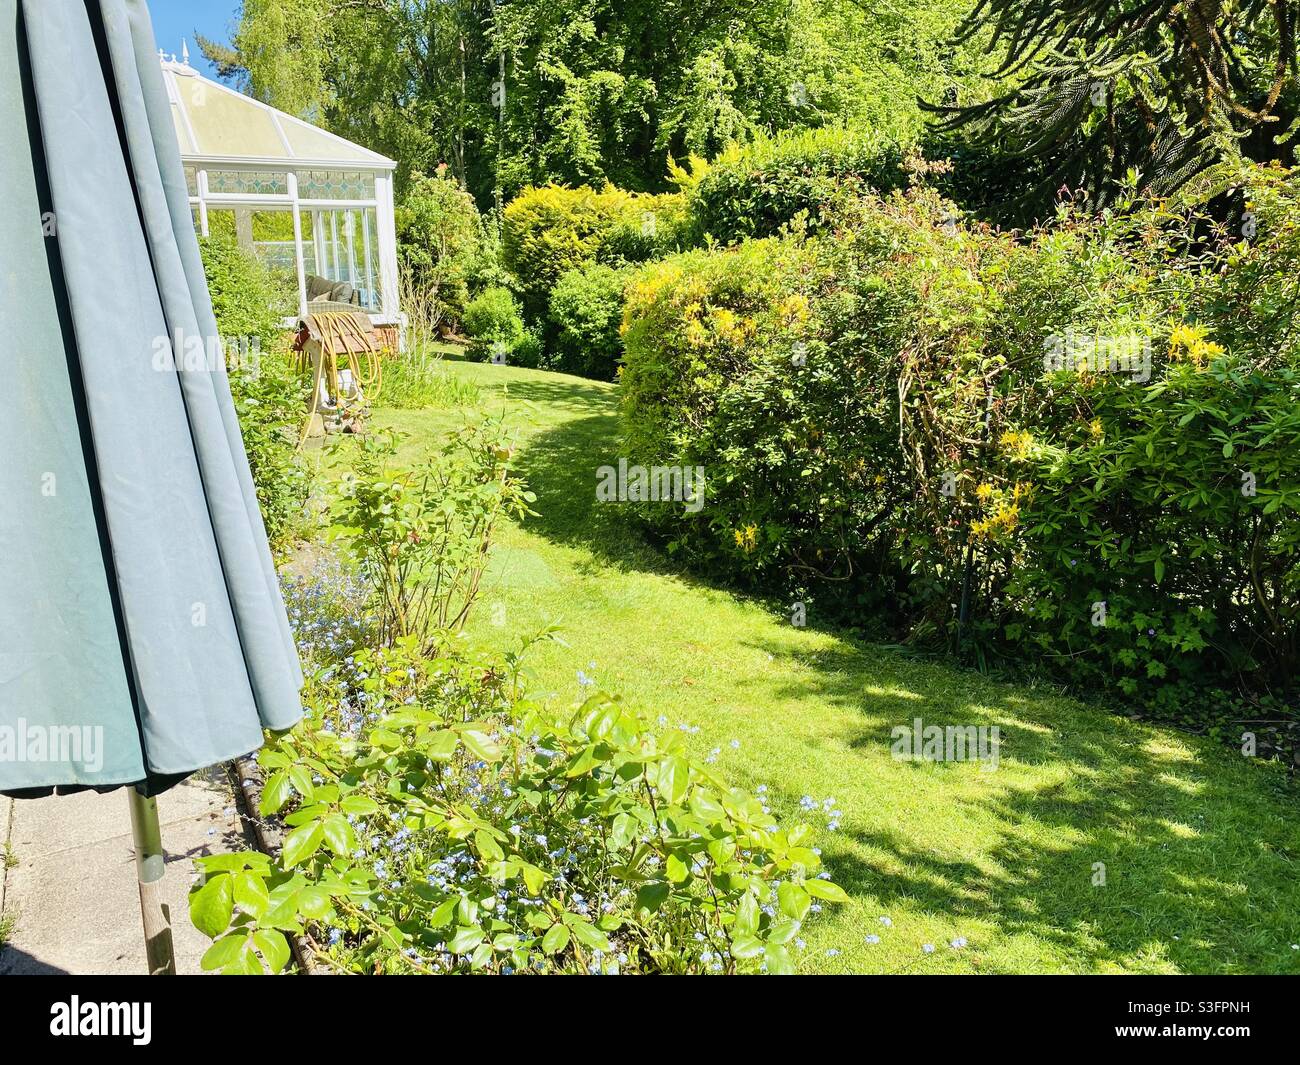 Just a typical English country garden ? Stock Photo